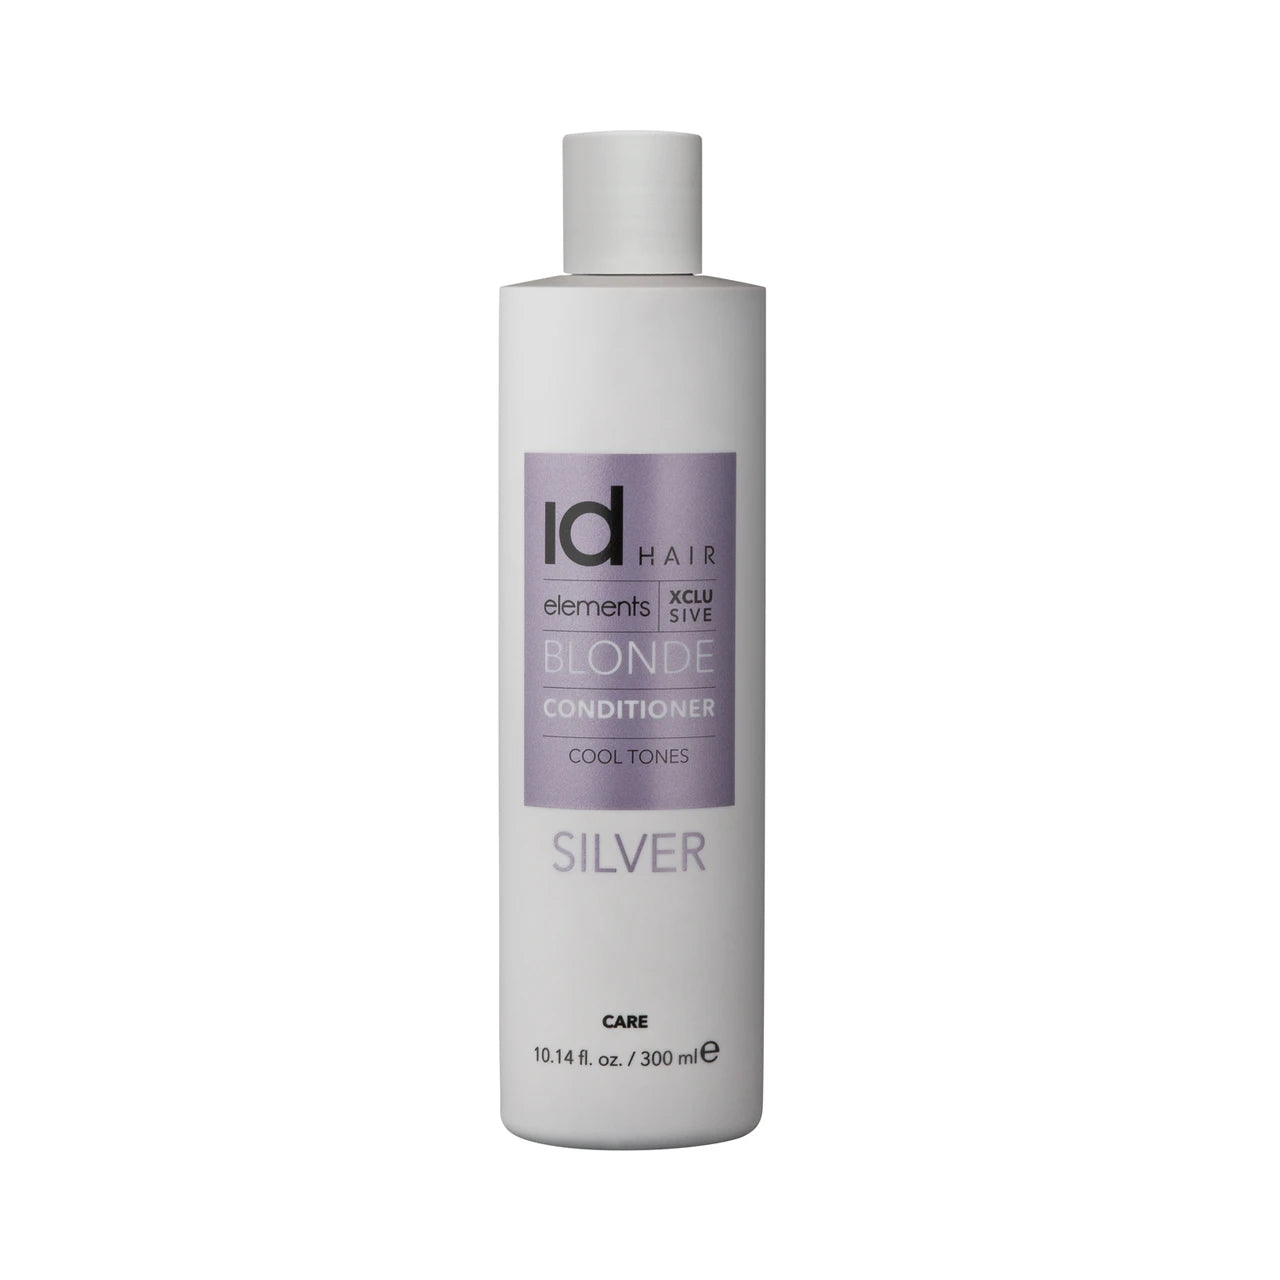 idHAIR ELEMENTS XCLS SILVER CONDITIONER